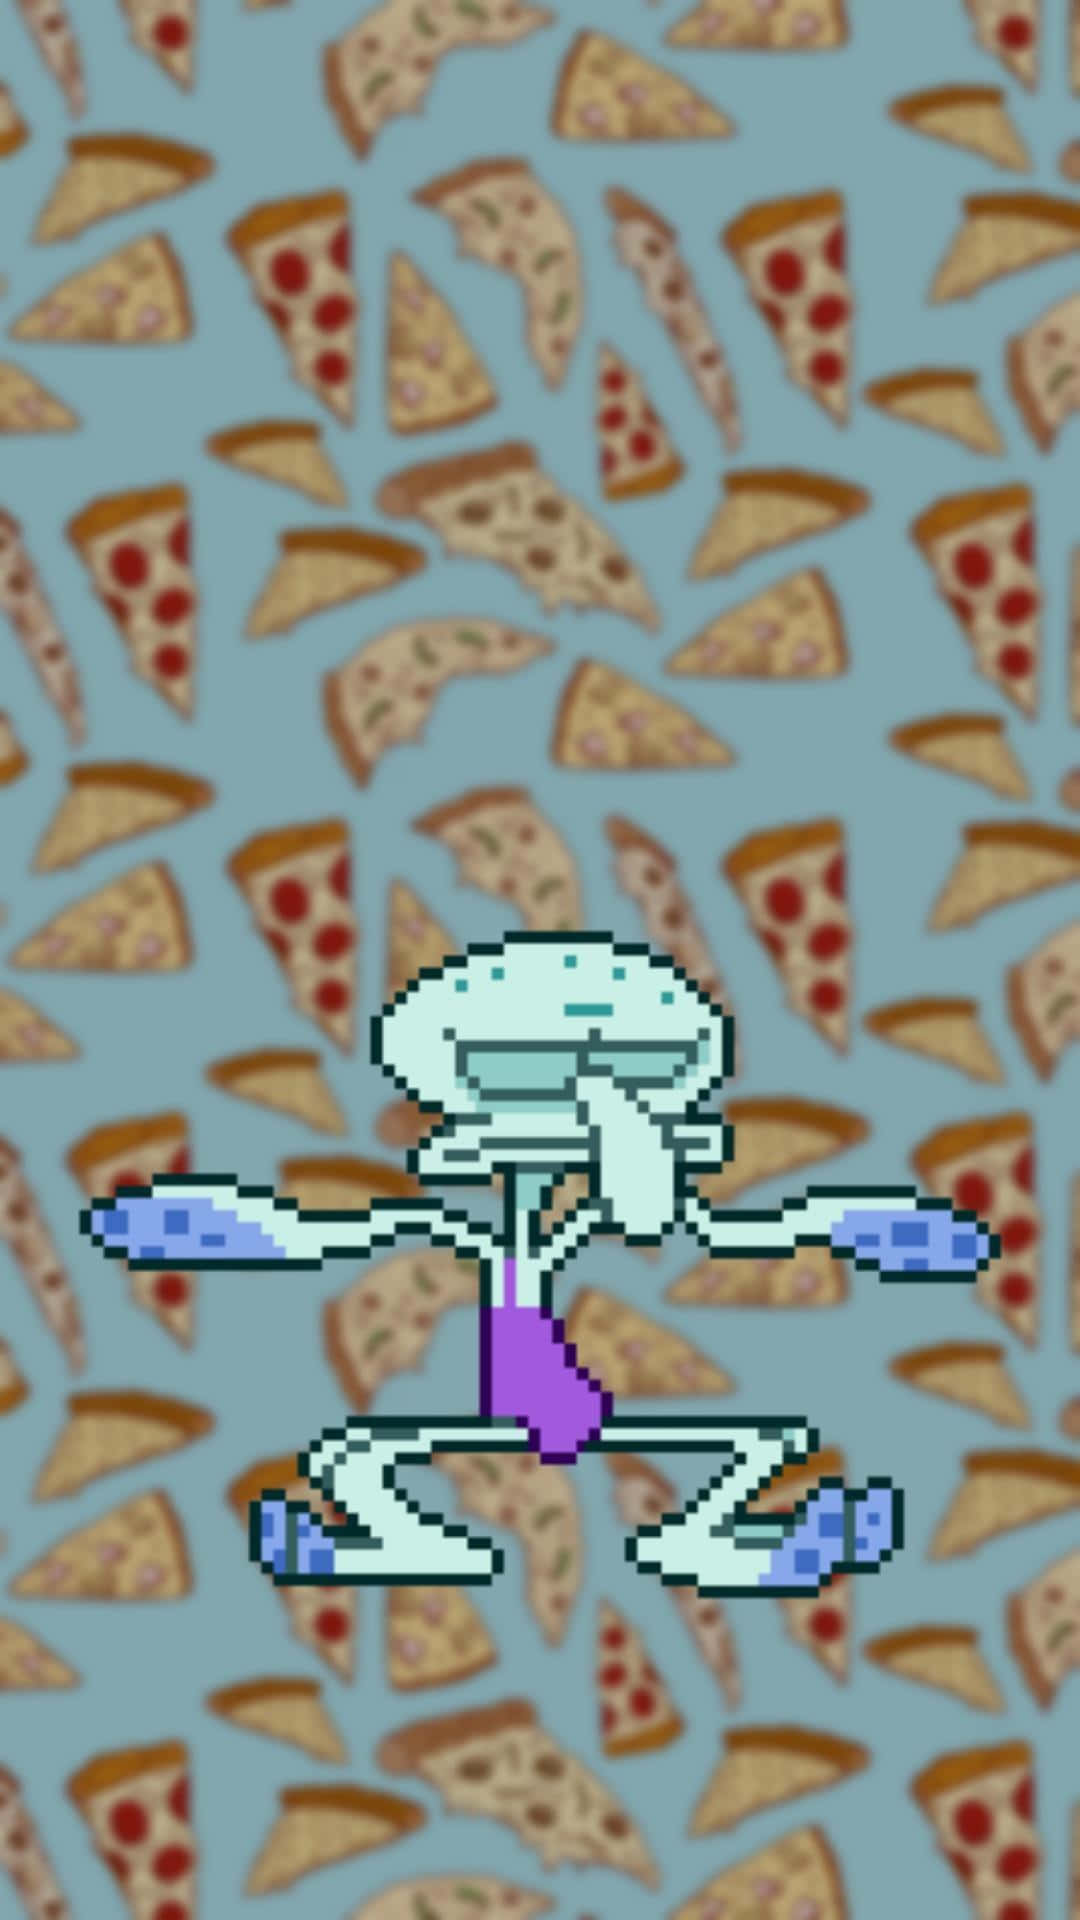 Relax and take some time out of your day to enjoy the calming aquatic depths of Aesthetic Squidward. Wallpaper